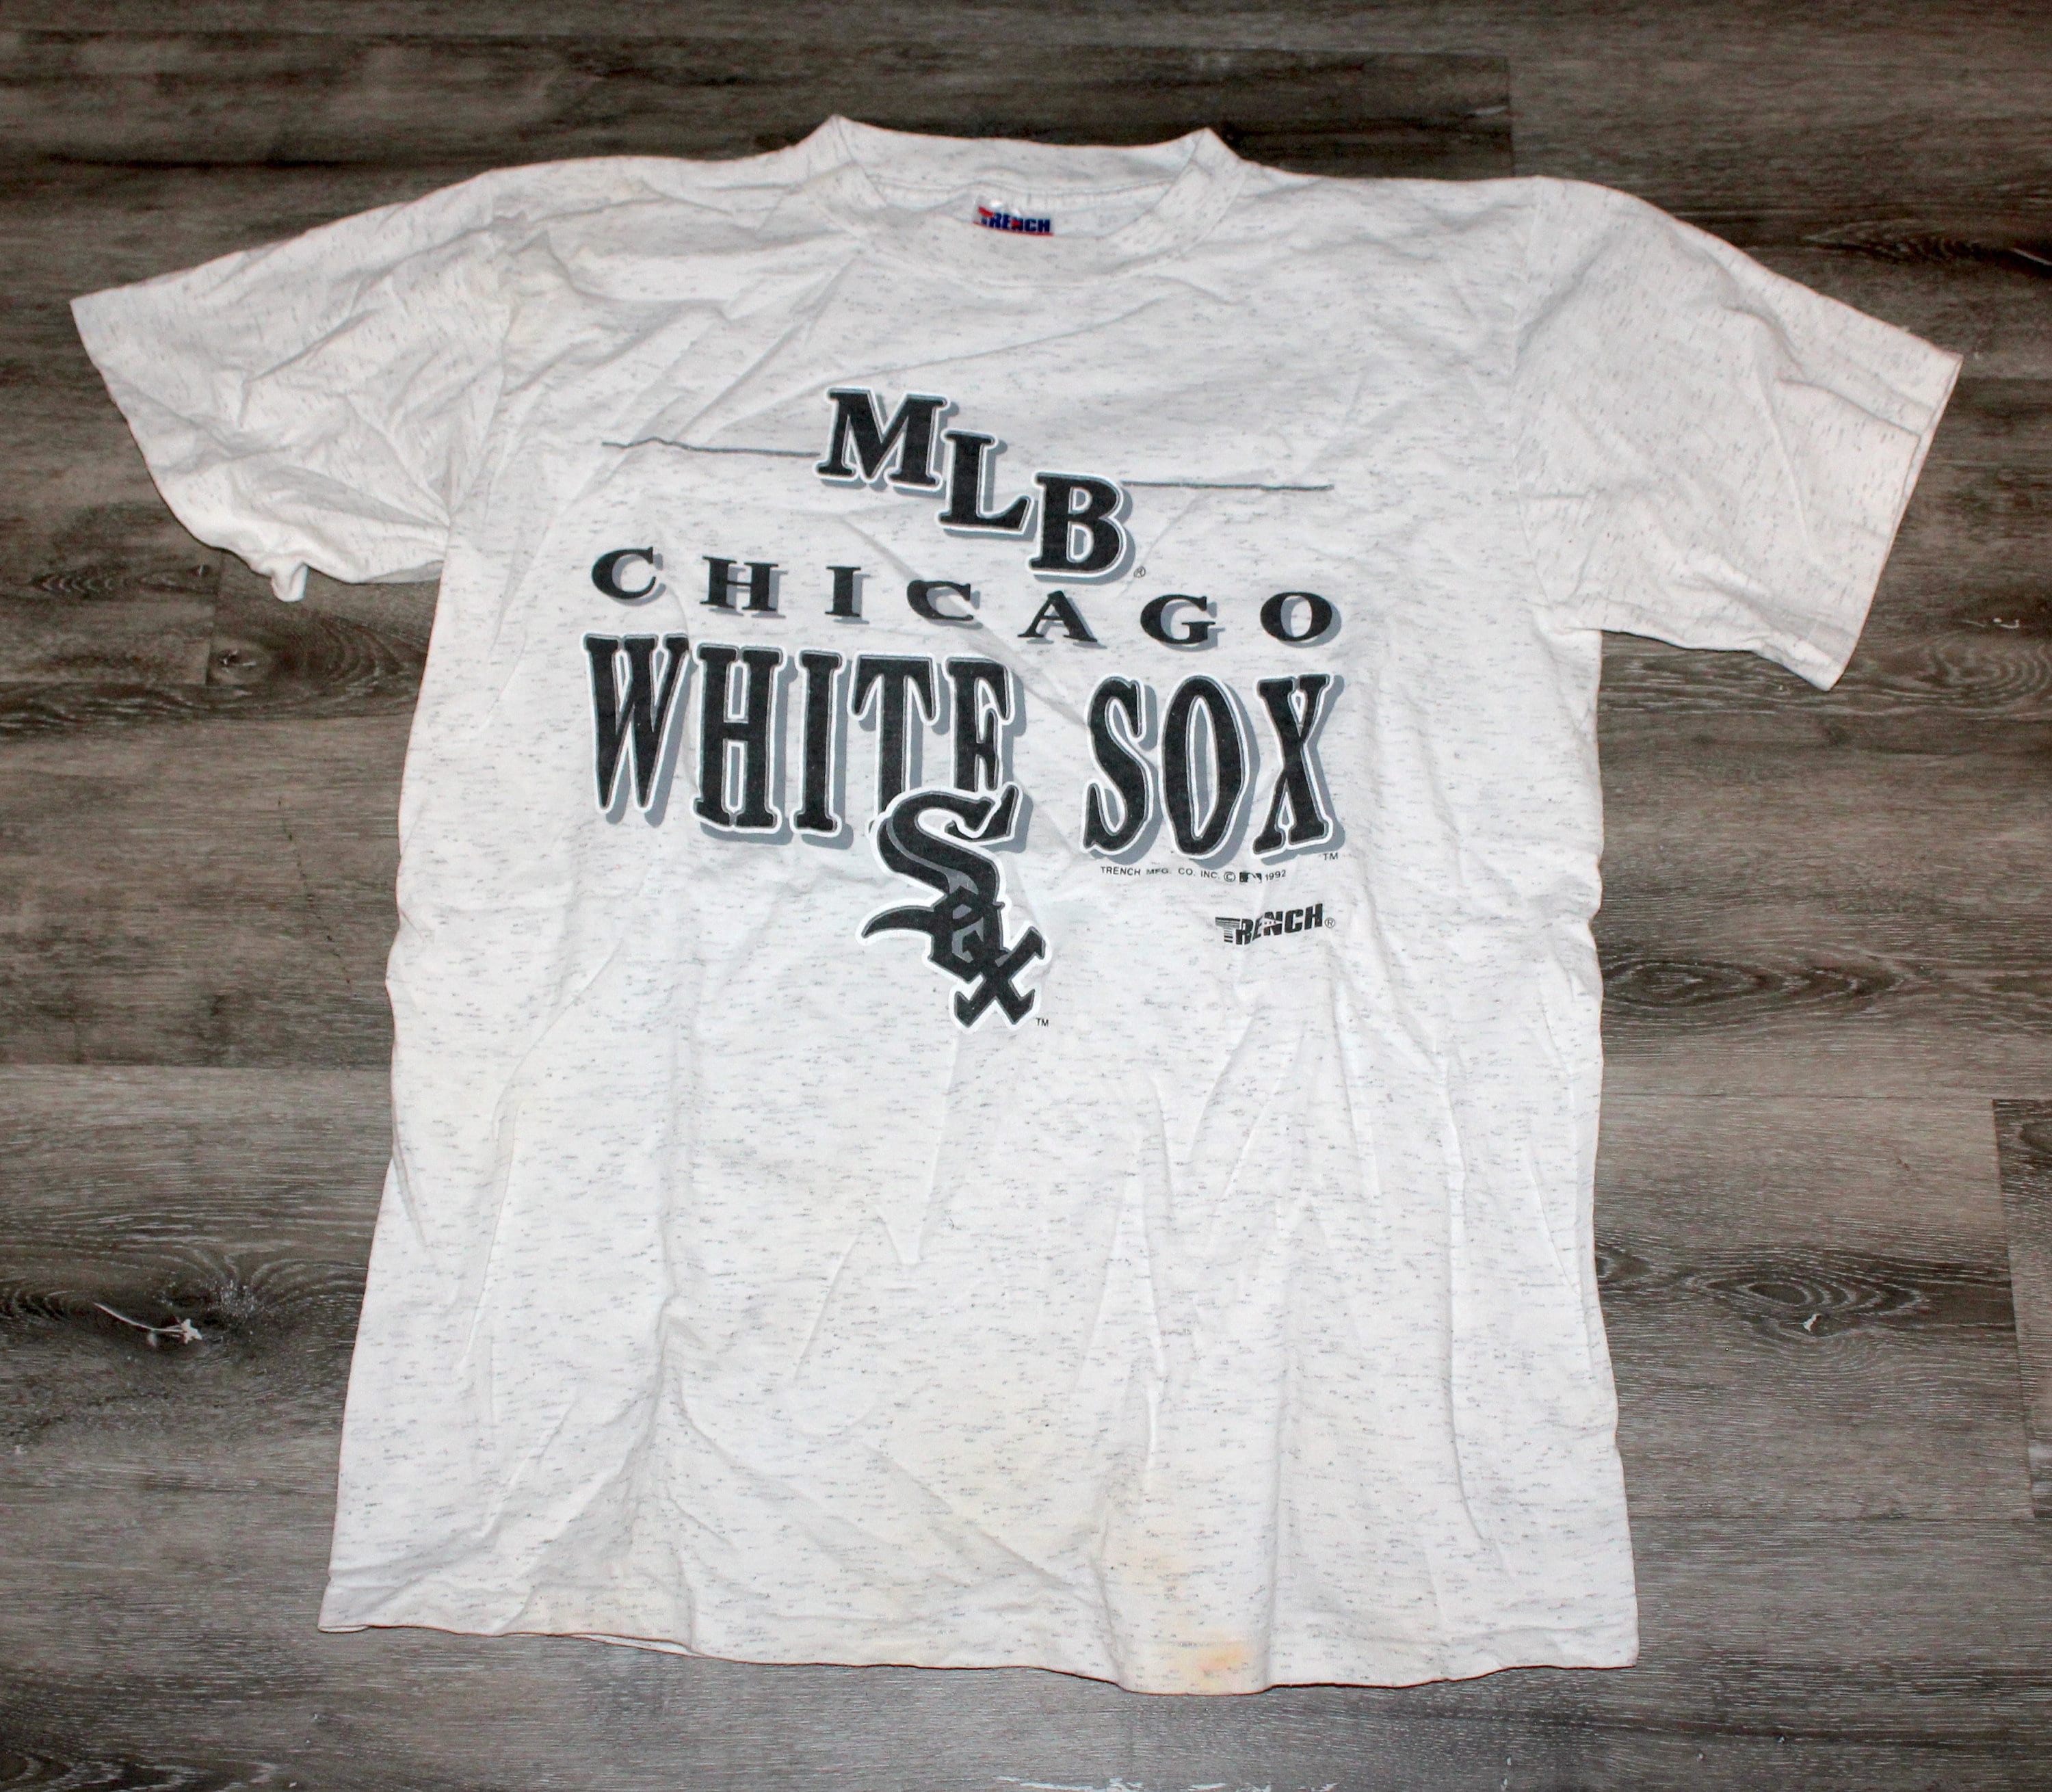 Chicago White Sox 1917 Throwback Jersey Size 48 Authentic Majestic